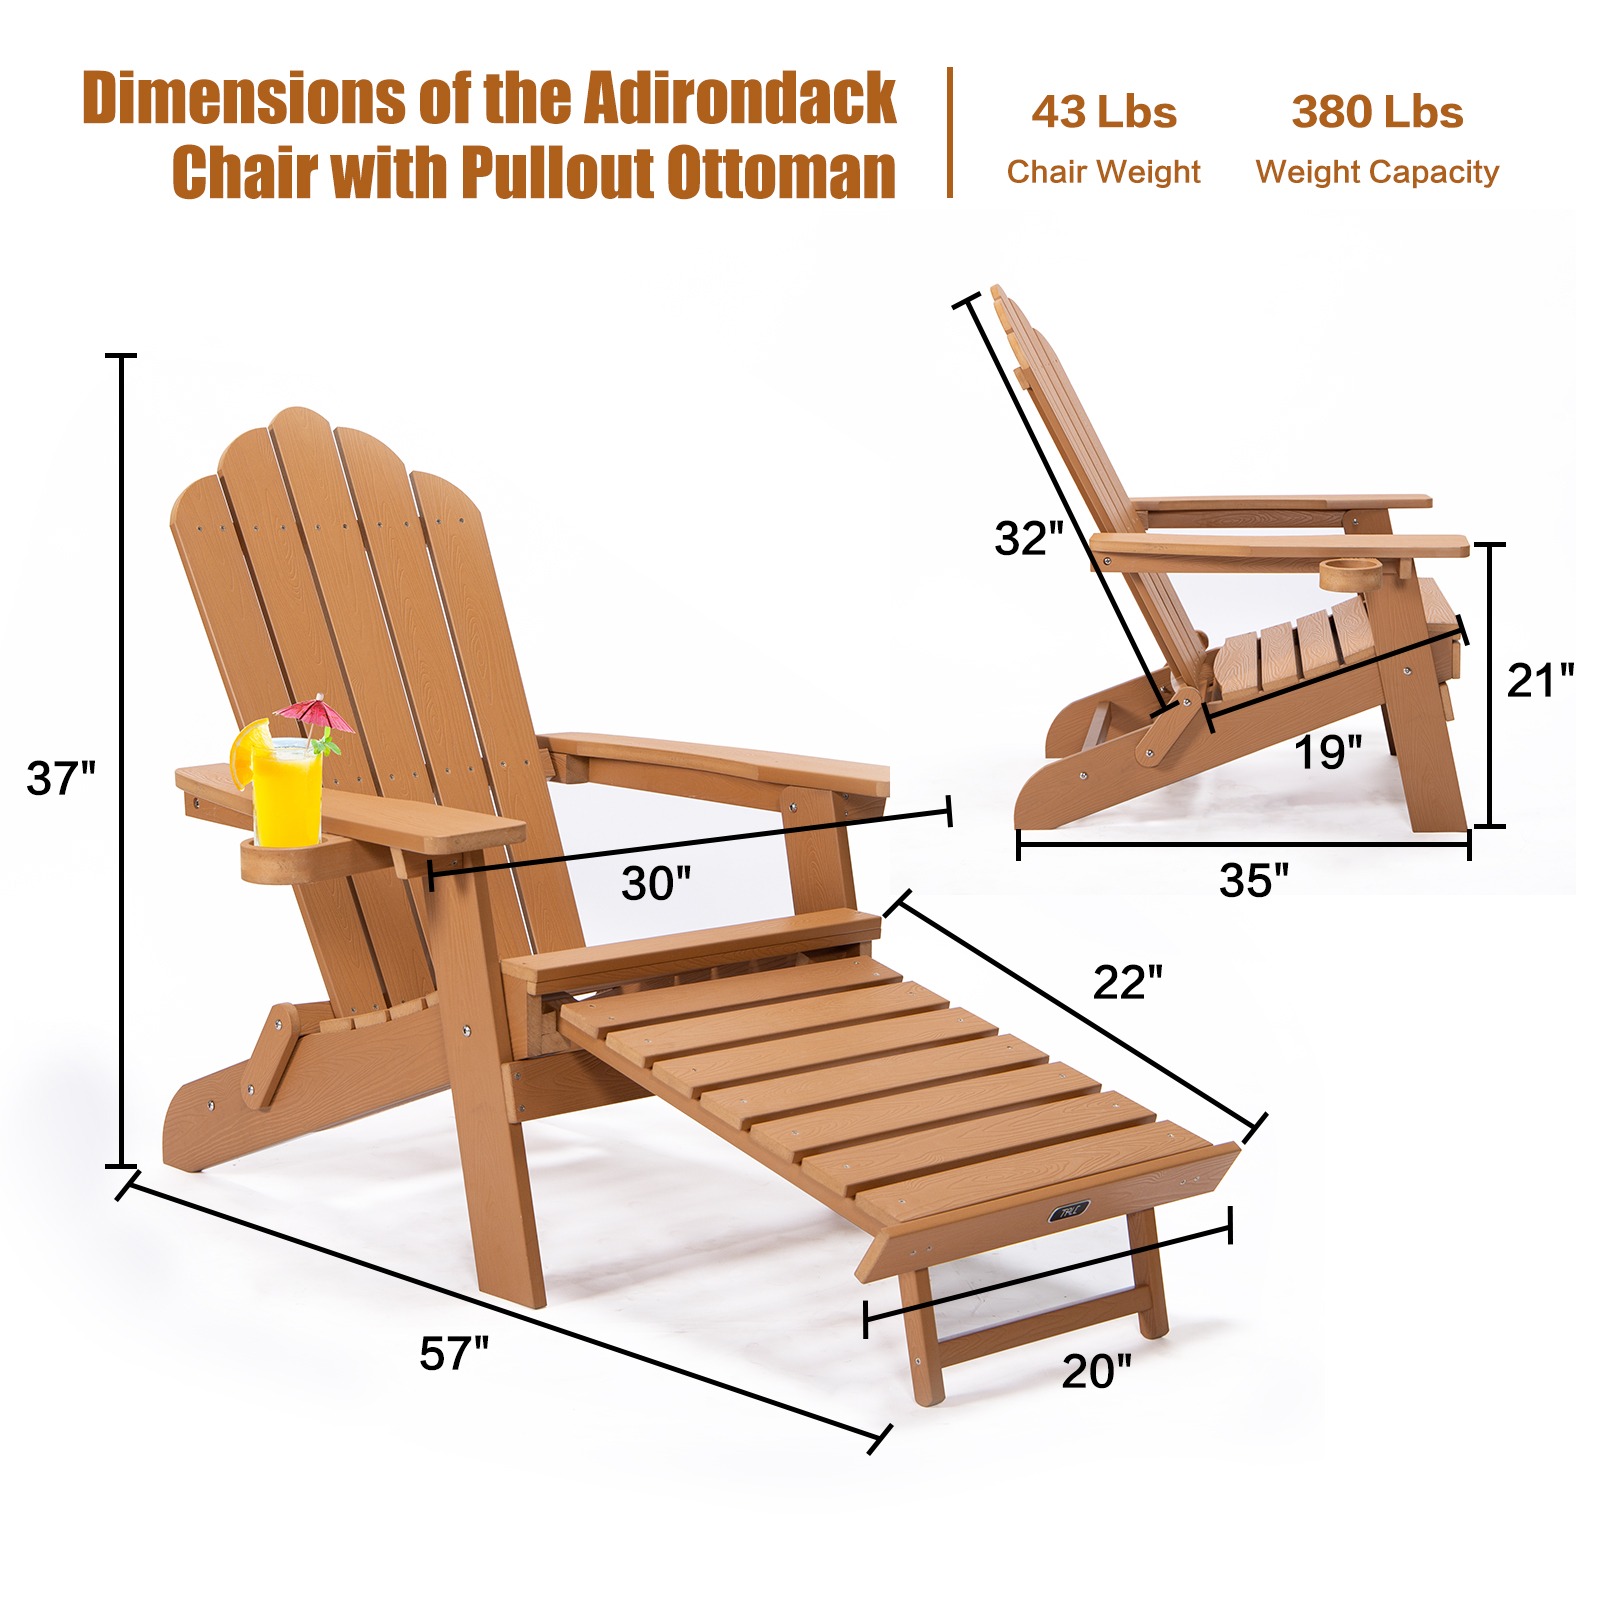 Branax Folding Adirondack Chair, Patio Chairs, Lawn Chair, Outdoor Chairs Painted Adirondack Chair Weather Resistant for Patio Deck Garden, Backyard Deck, 400 lbs Capacity Load, Brown - image 4 of 8